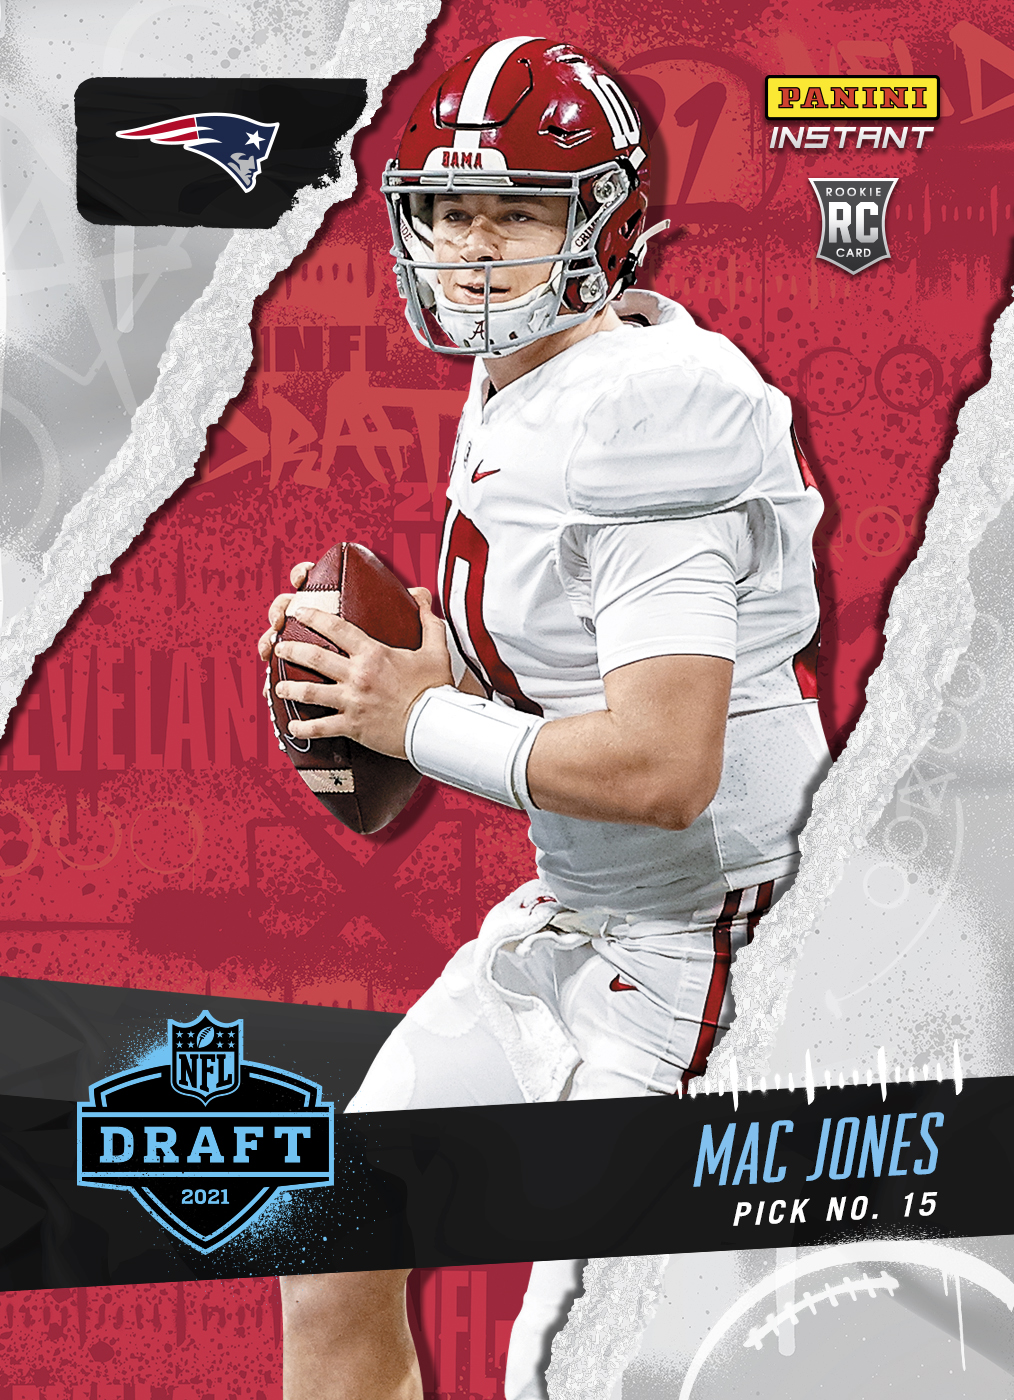 2021 Panini Instant #18 Mac Jones Rookie Card Only 2,409 made! Breaks Franchise Rookie QB Record 